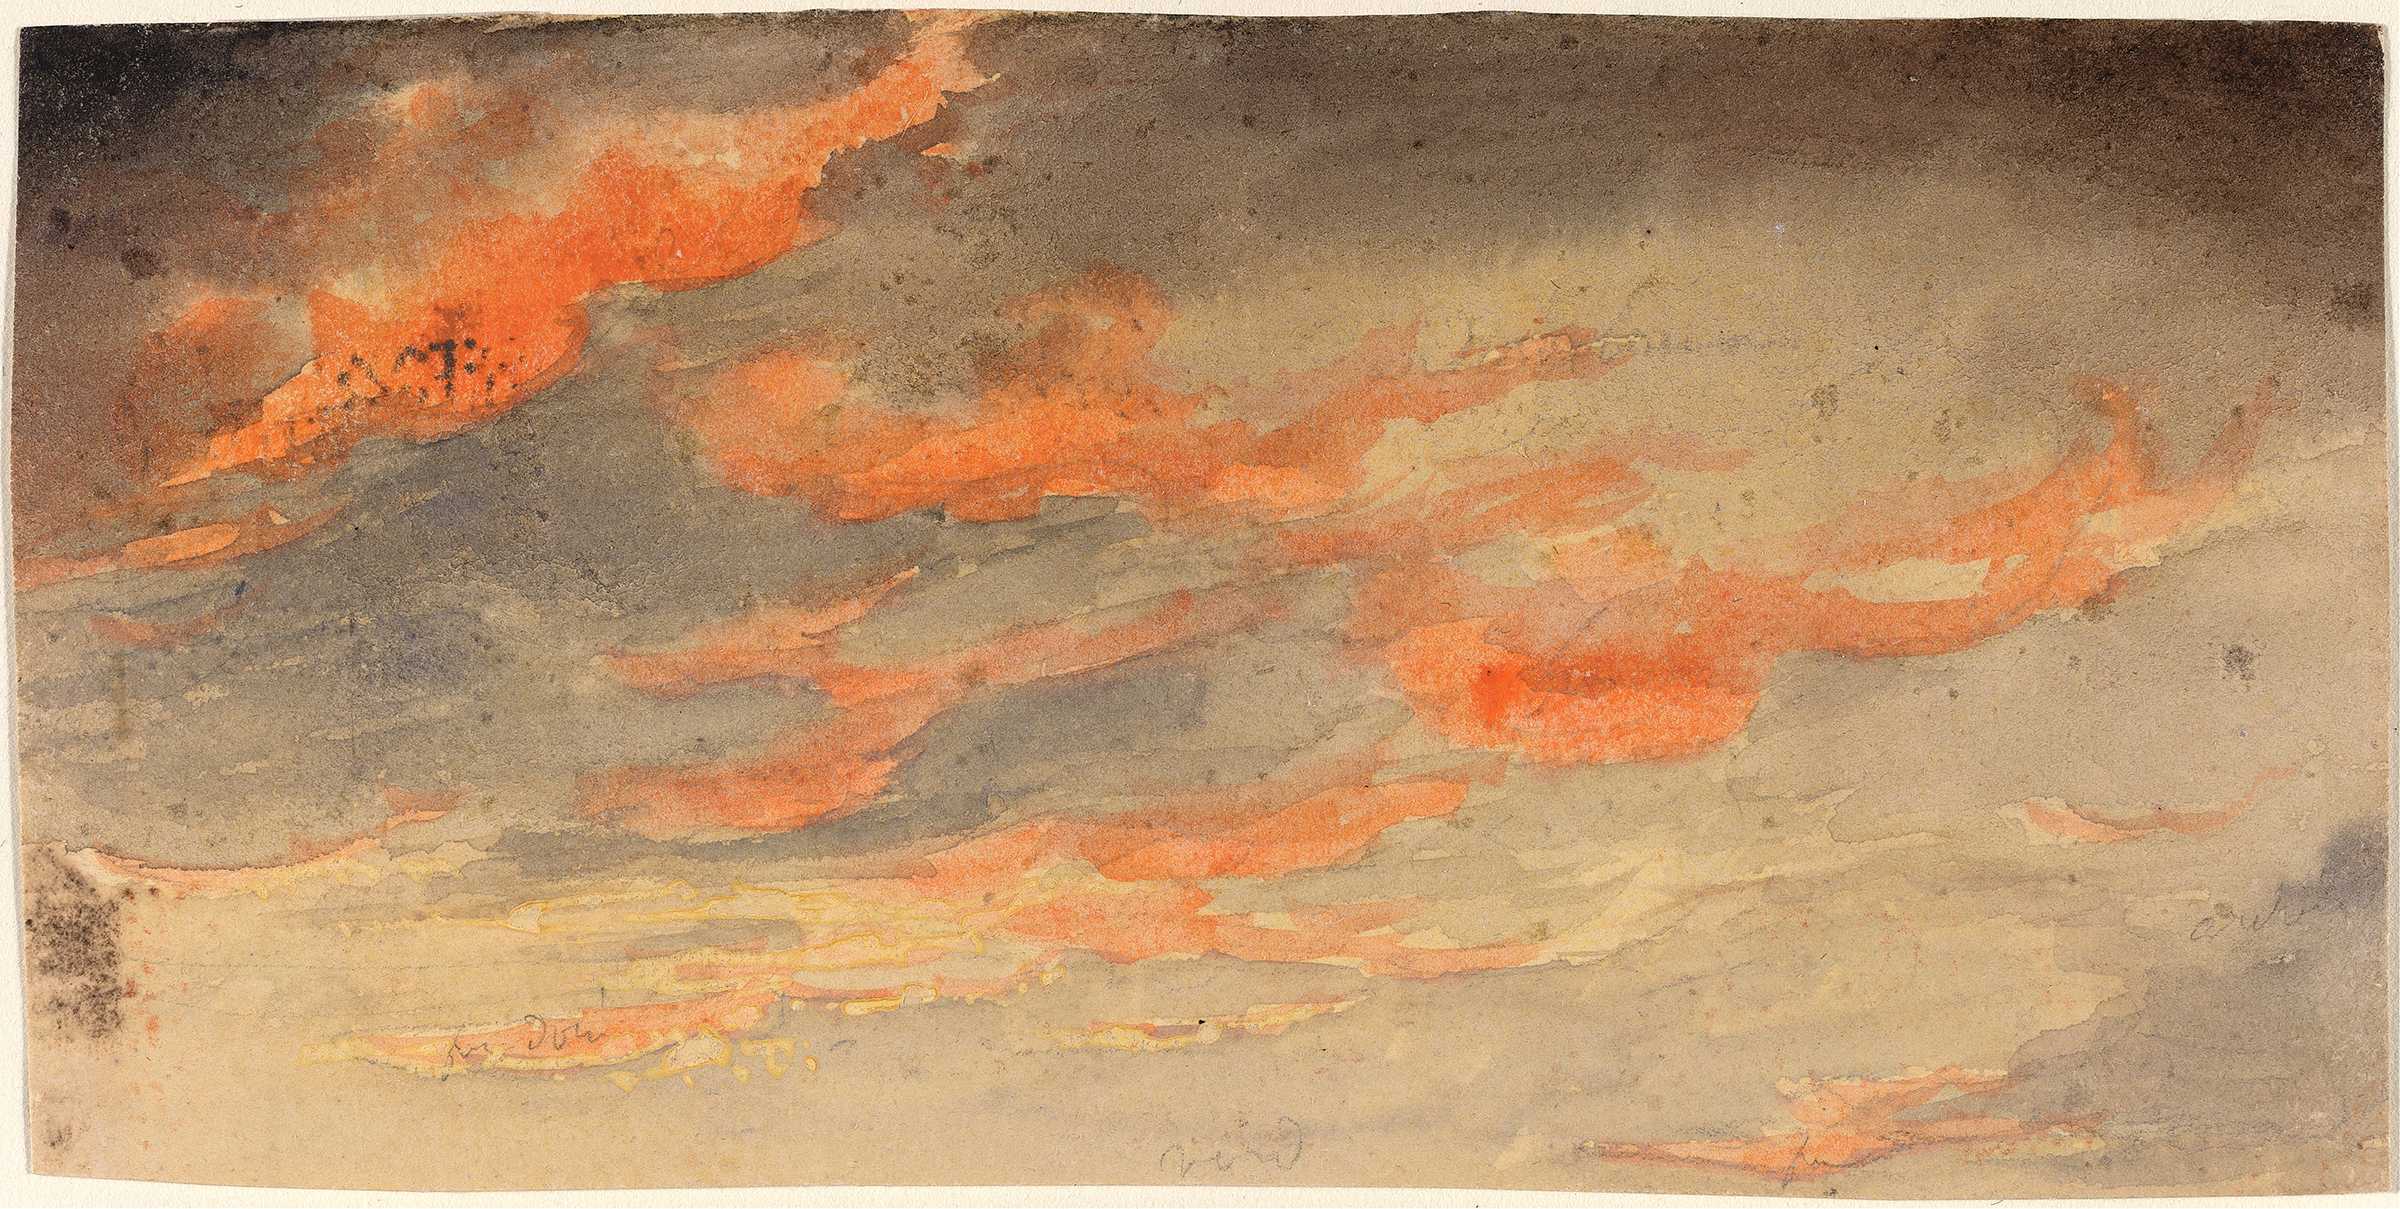 Find out more about James Hamilton Shegogue - Clouds At Sunset